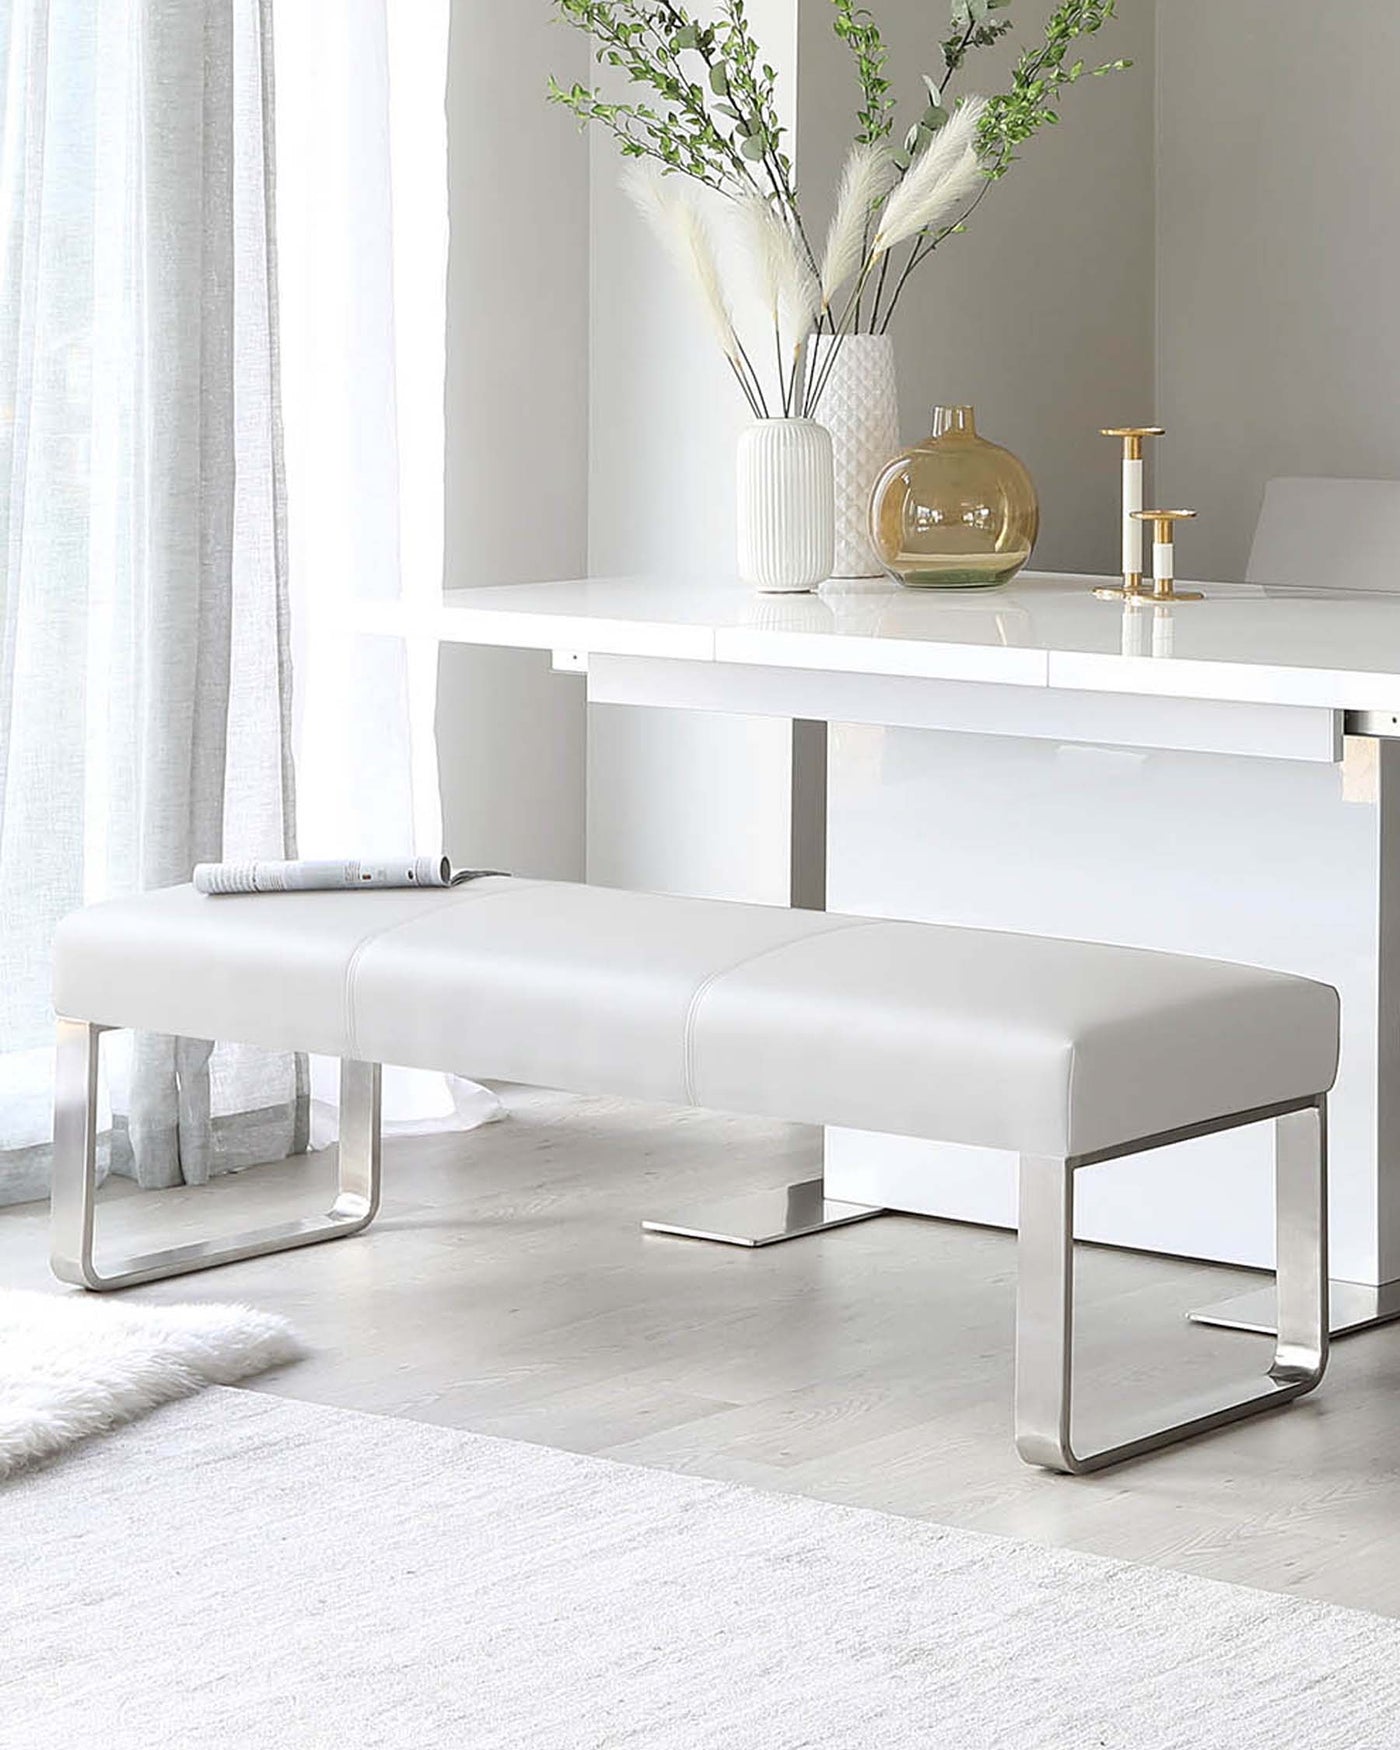 Modern minimalist furniture set including a sleek white rectangular console table with metal supports and a matching bench with a padded leather seat and metallic base. The scene is complemented by decorative vases and a small gold candlestick holder on the table, indicating a contemporary and elegant design aesthetic.